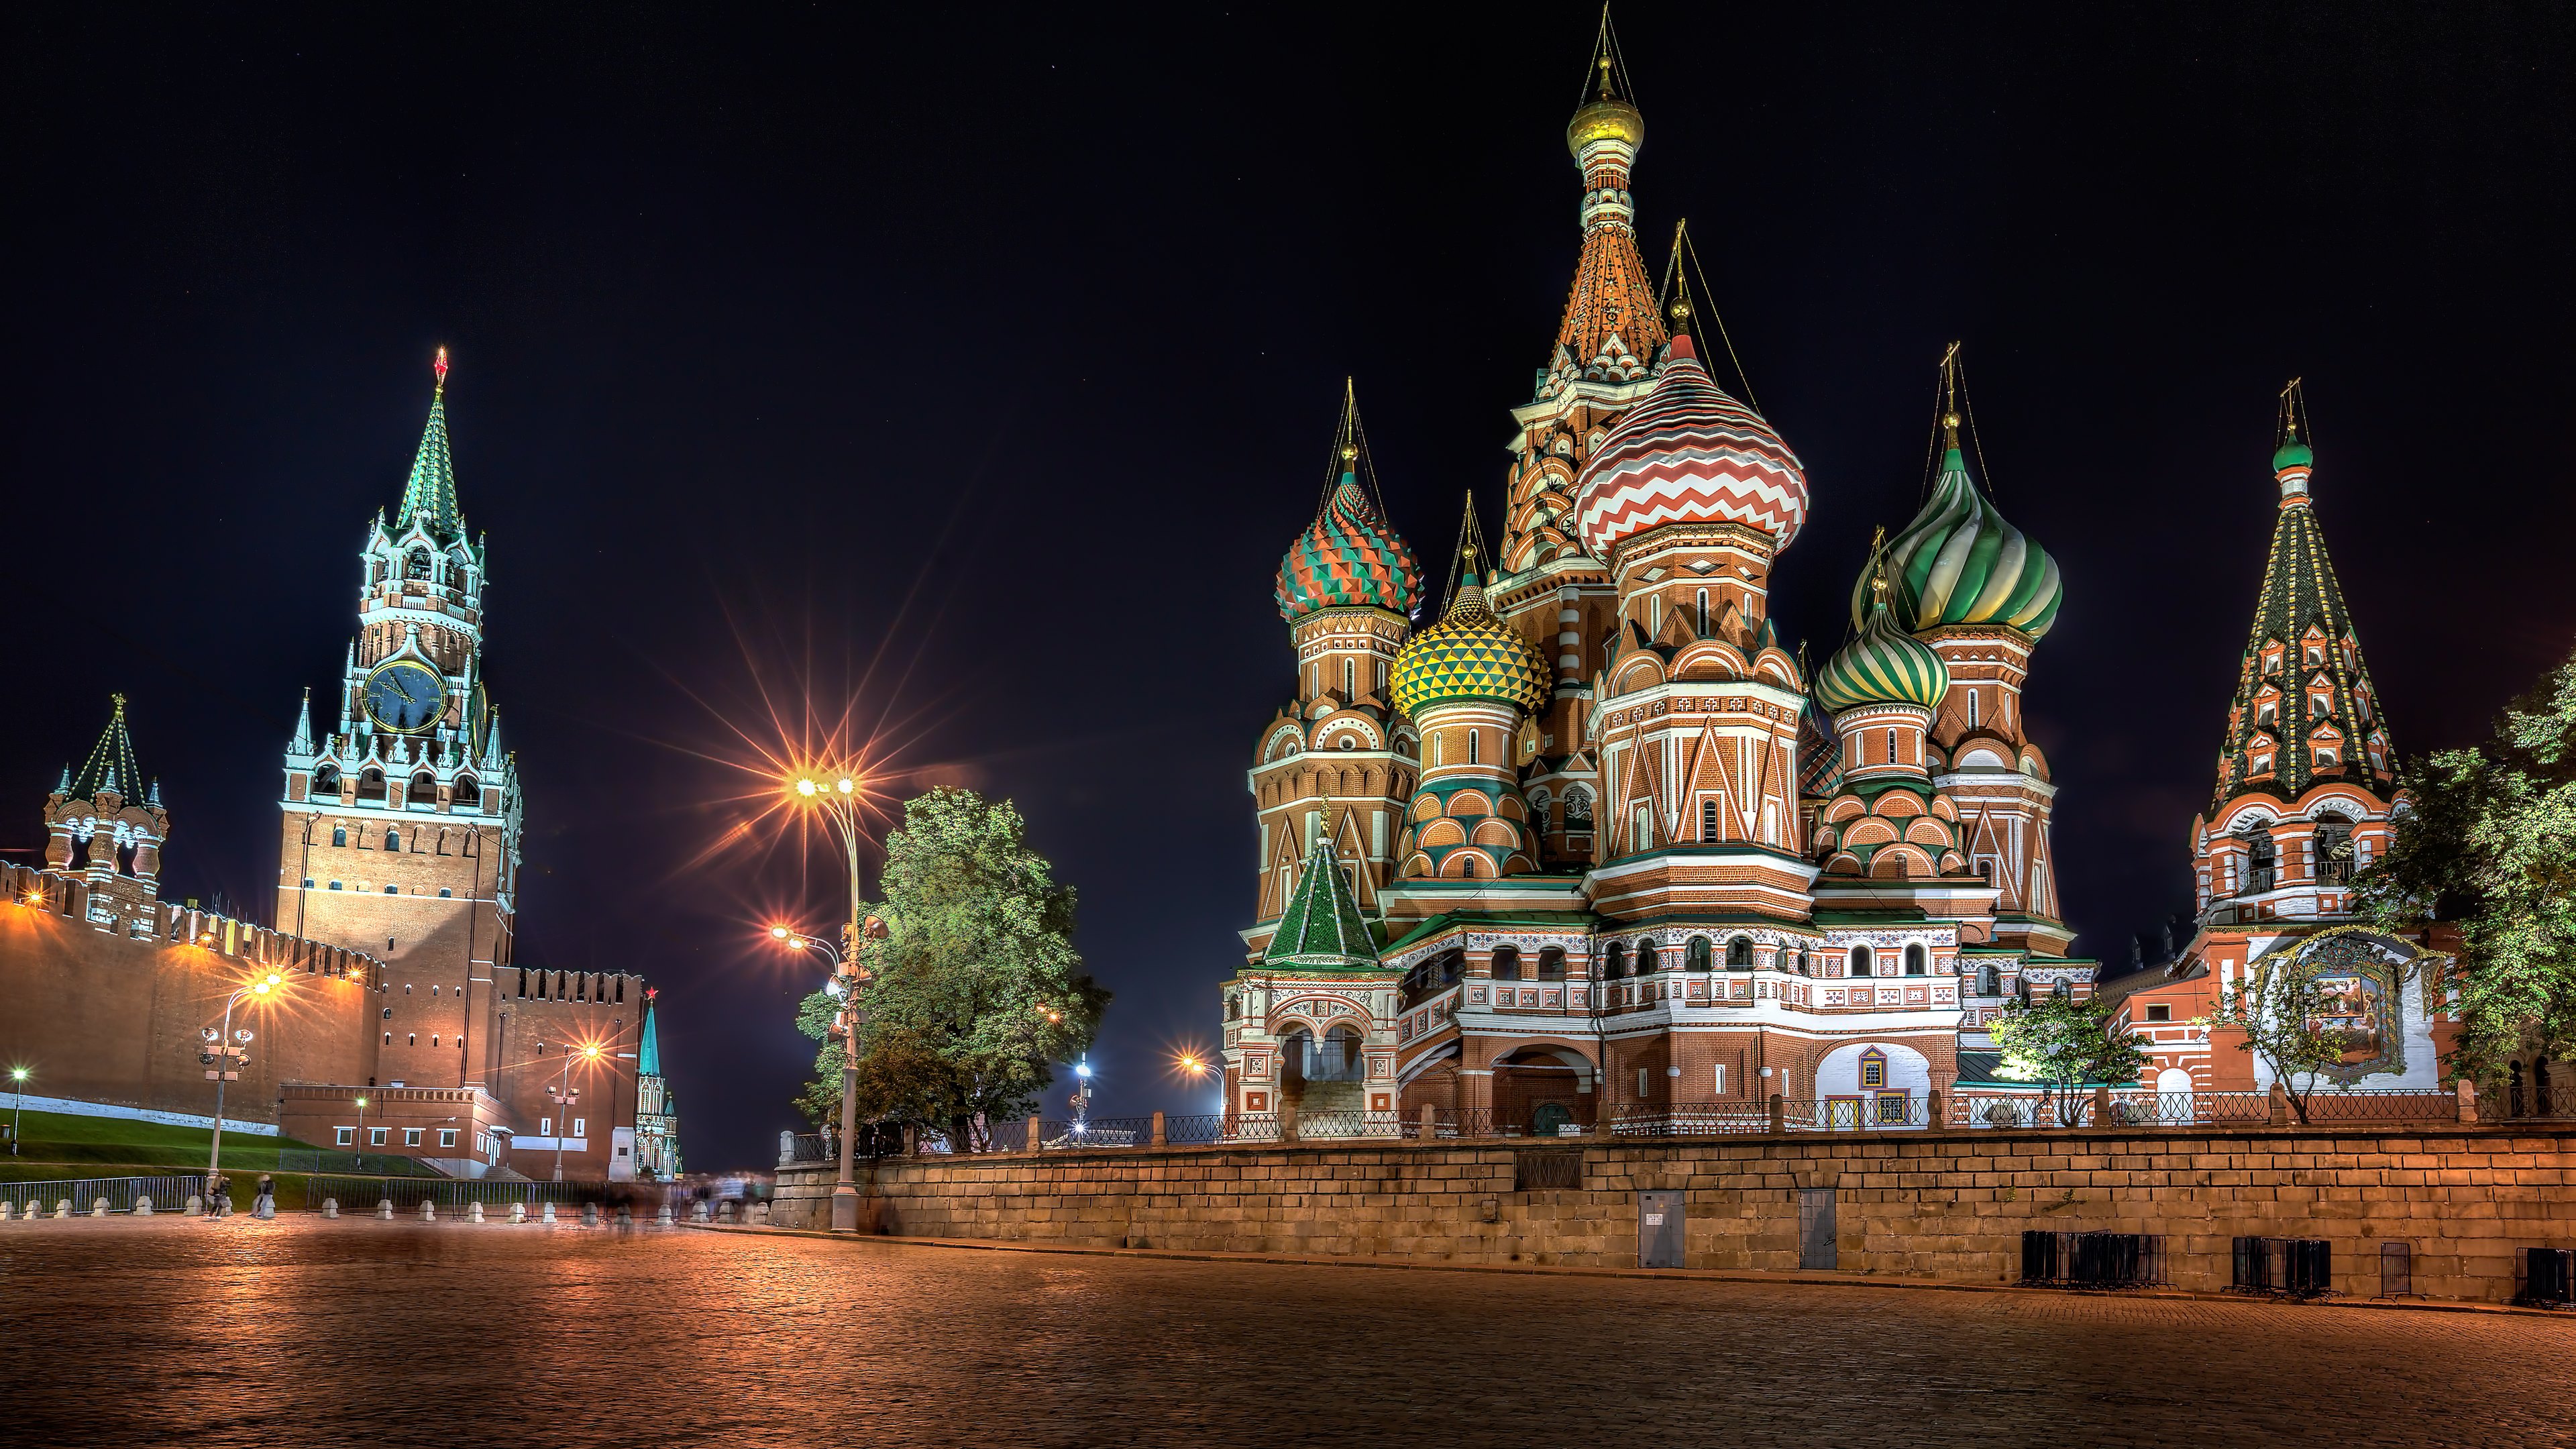 russia, religious, saint basil's cathedral, cathedrals